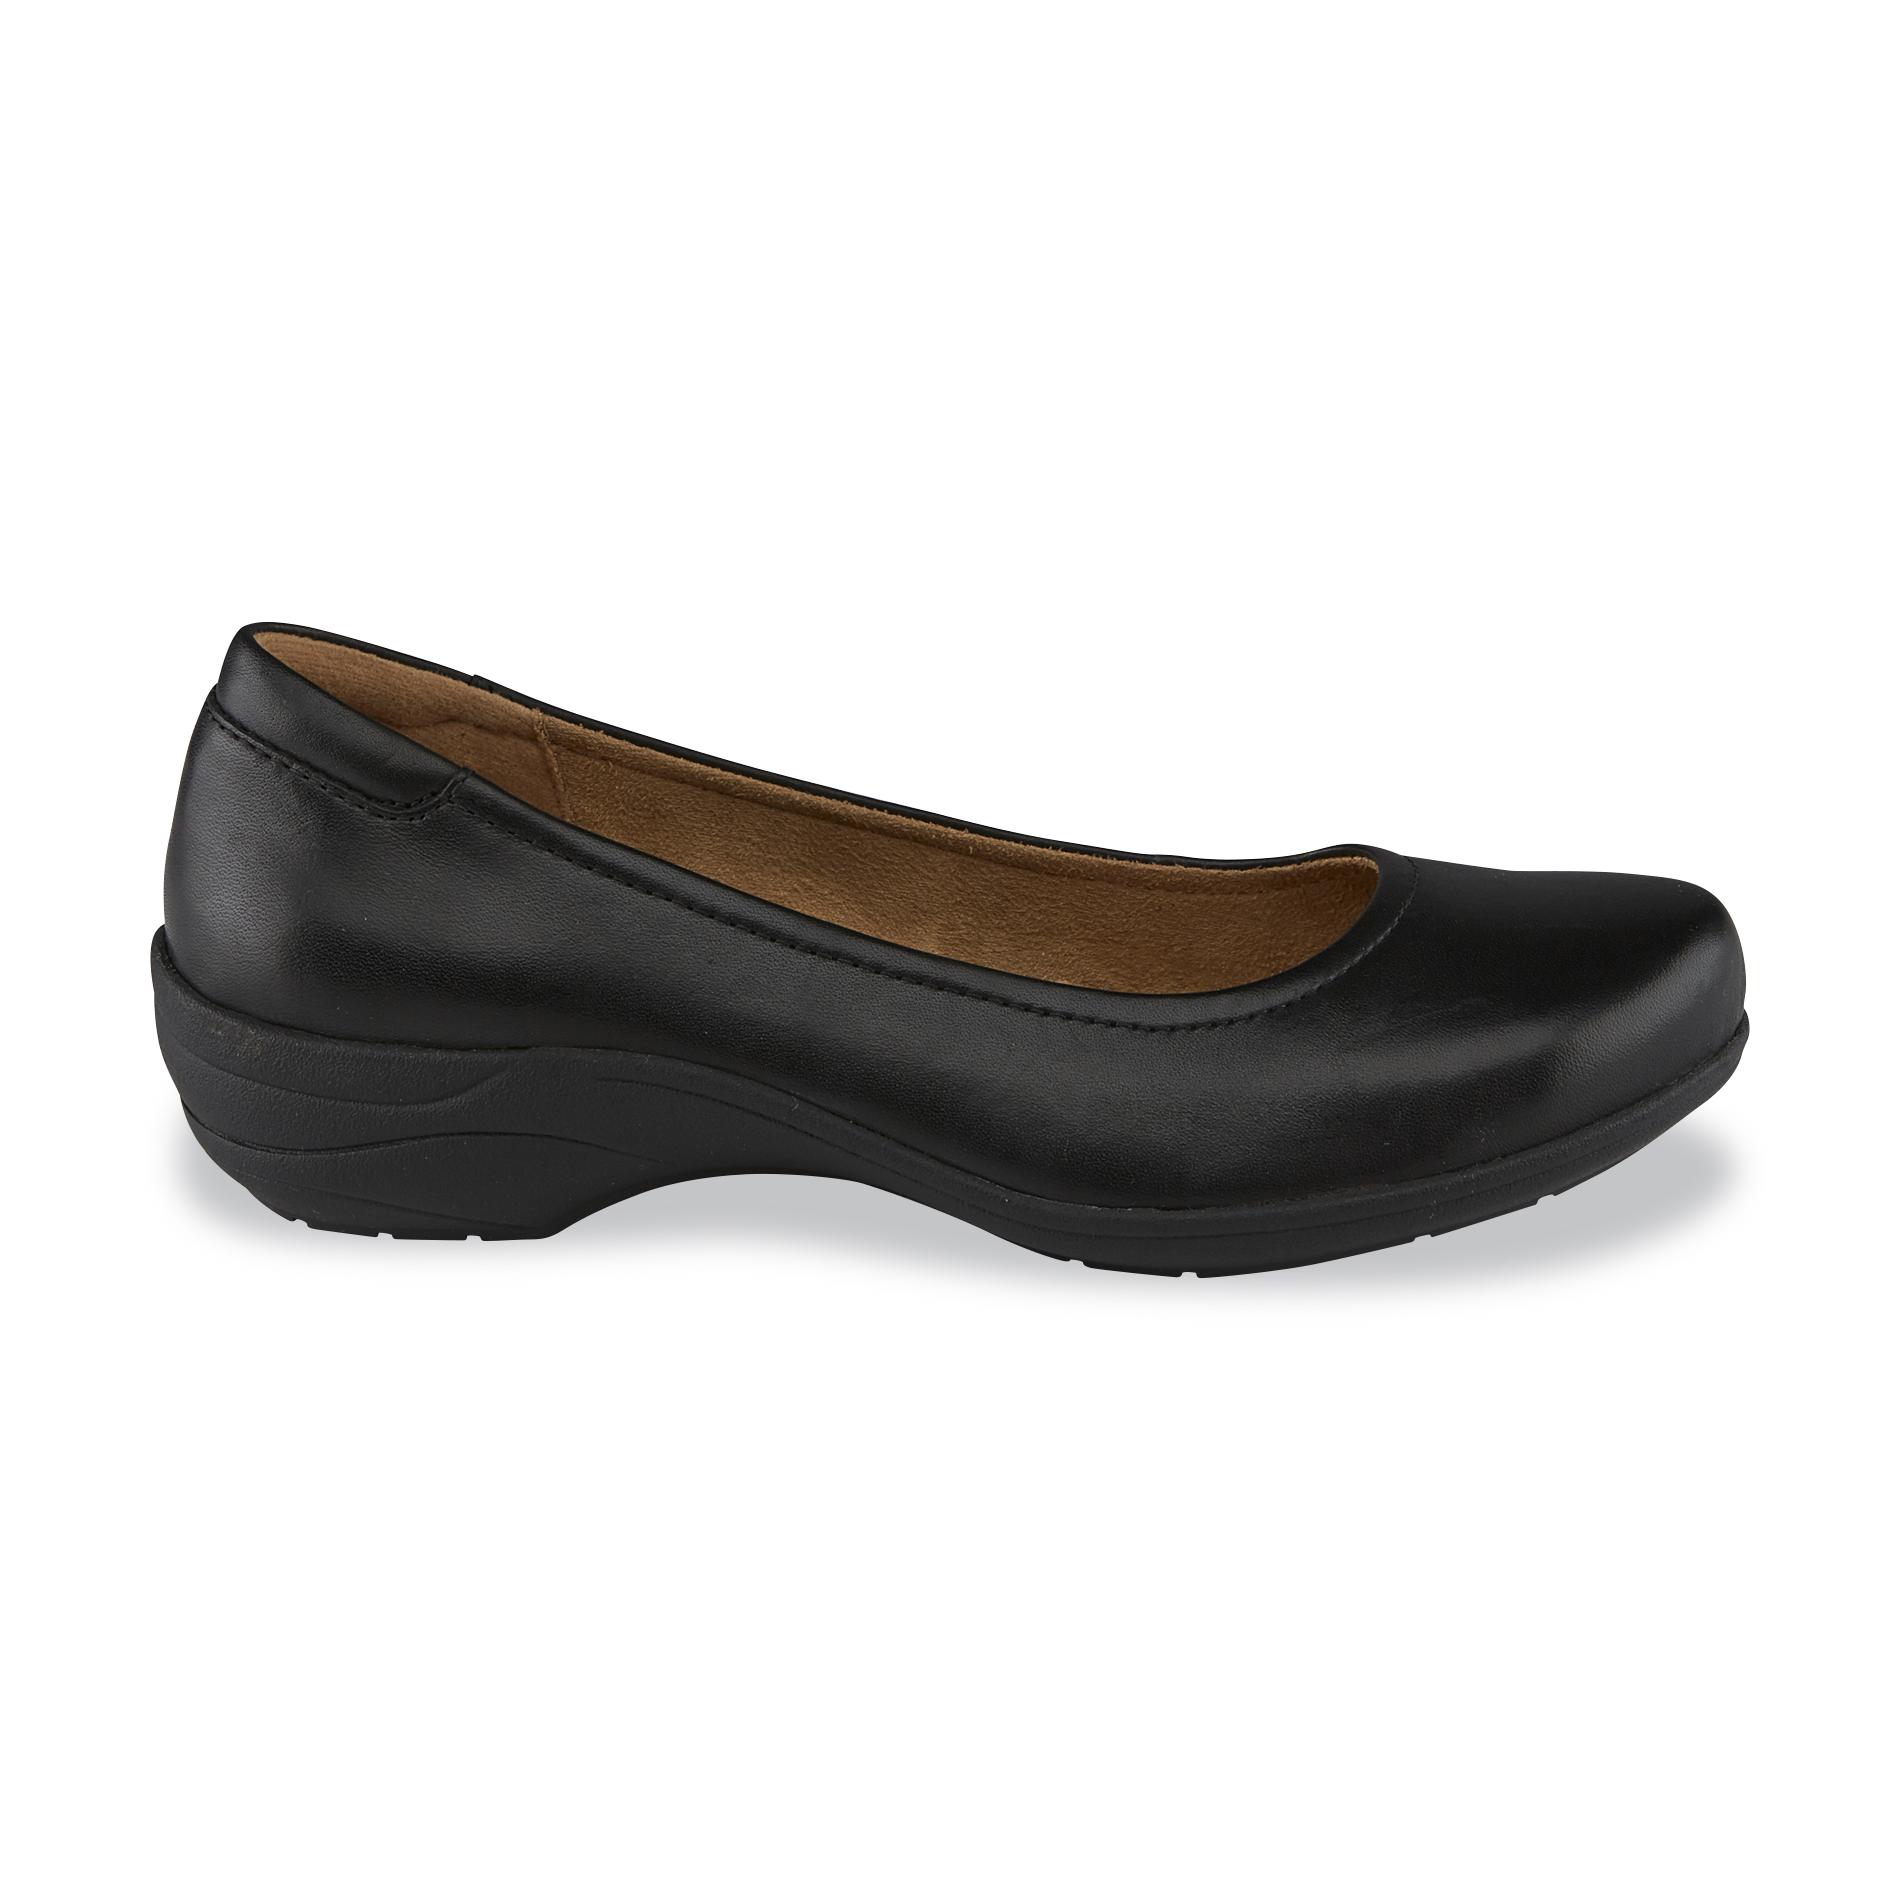 women's shoes with wide width